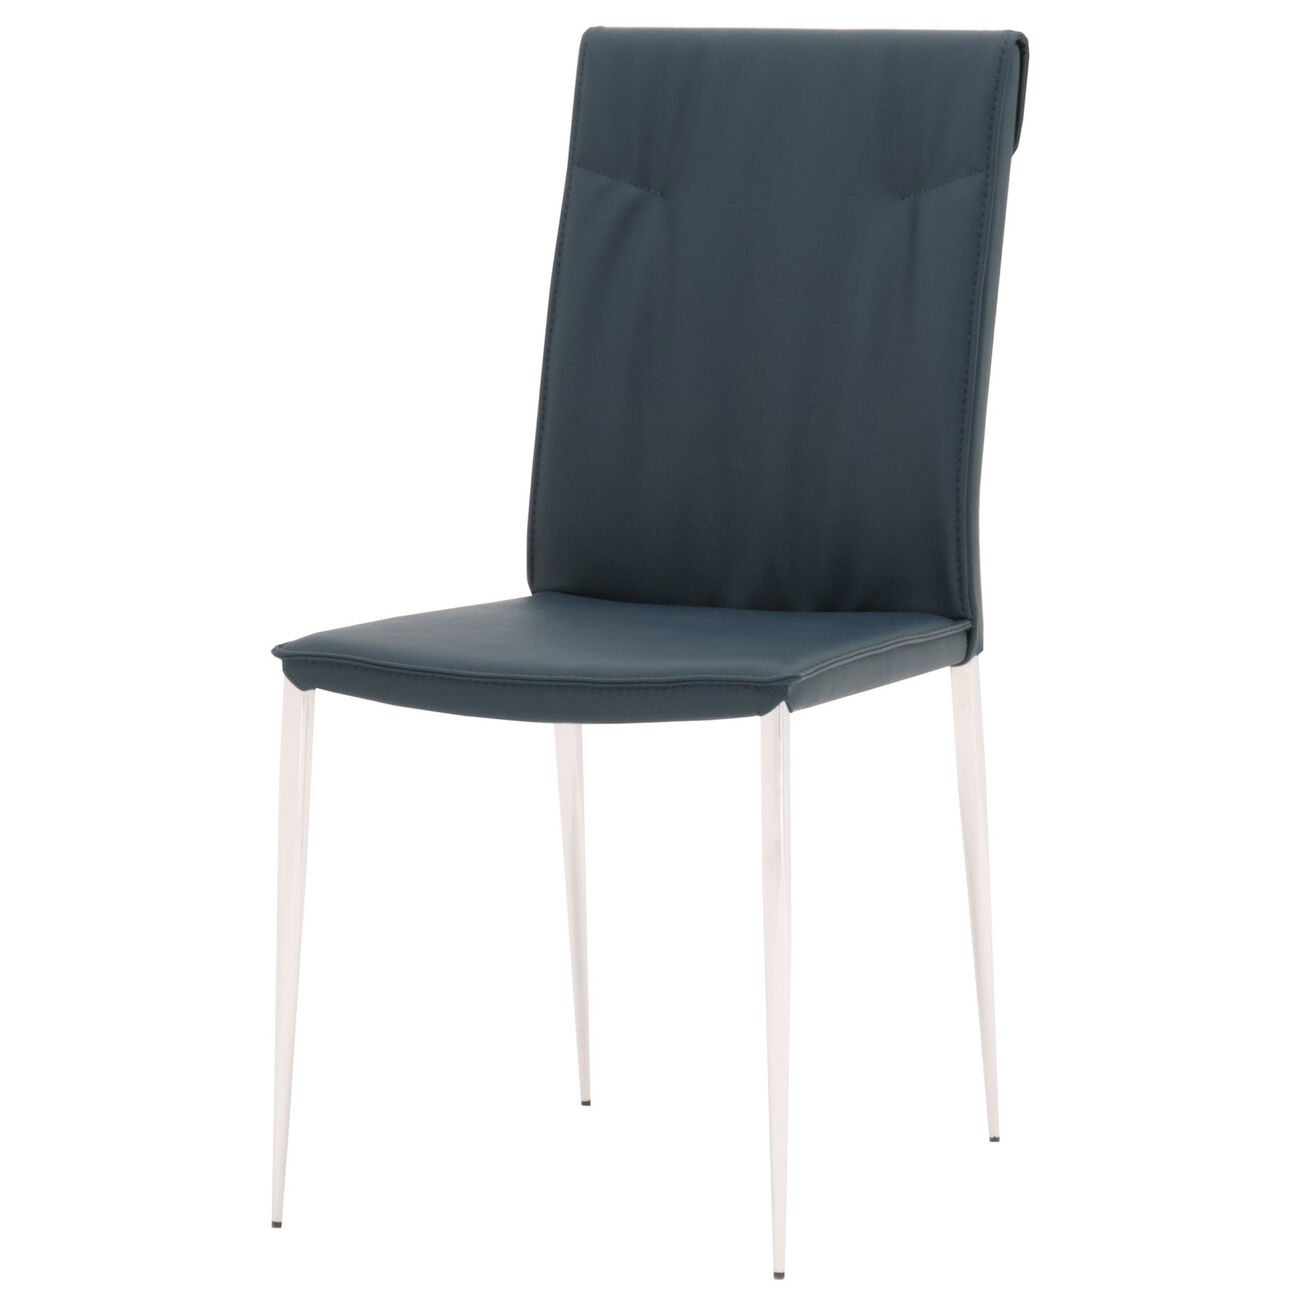 Leatherette Dining Chair with Slim Legs and Piped Edges, Set of 2,Navy Blue